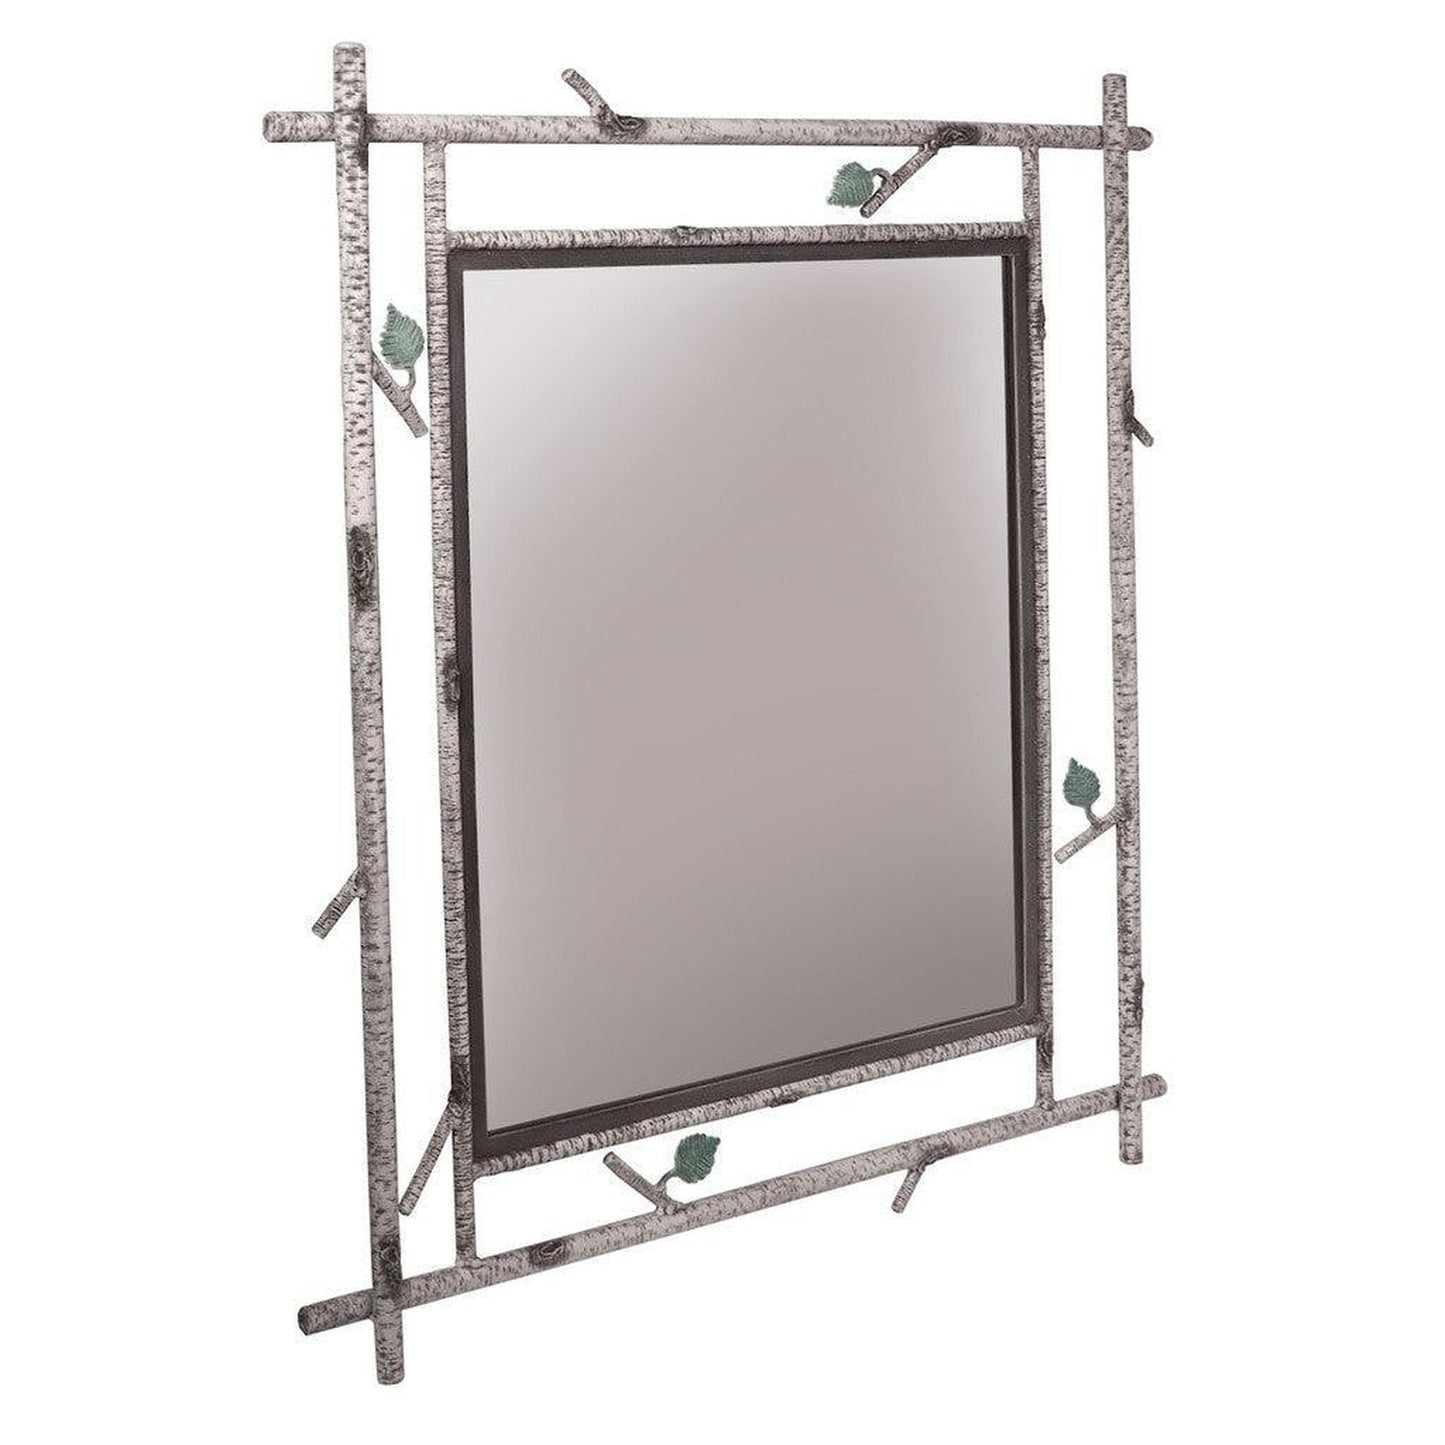 Stone County Ironworks Whisper Creek 35" x 47" Large Hand Rubbed Brass Iron Wall Mirror